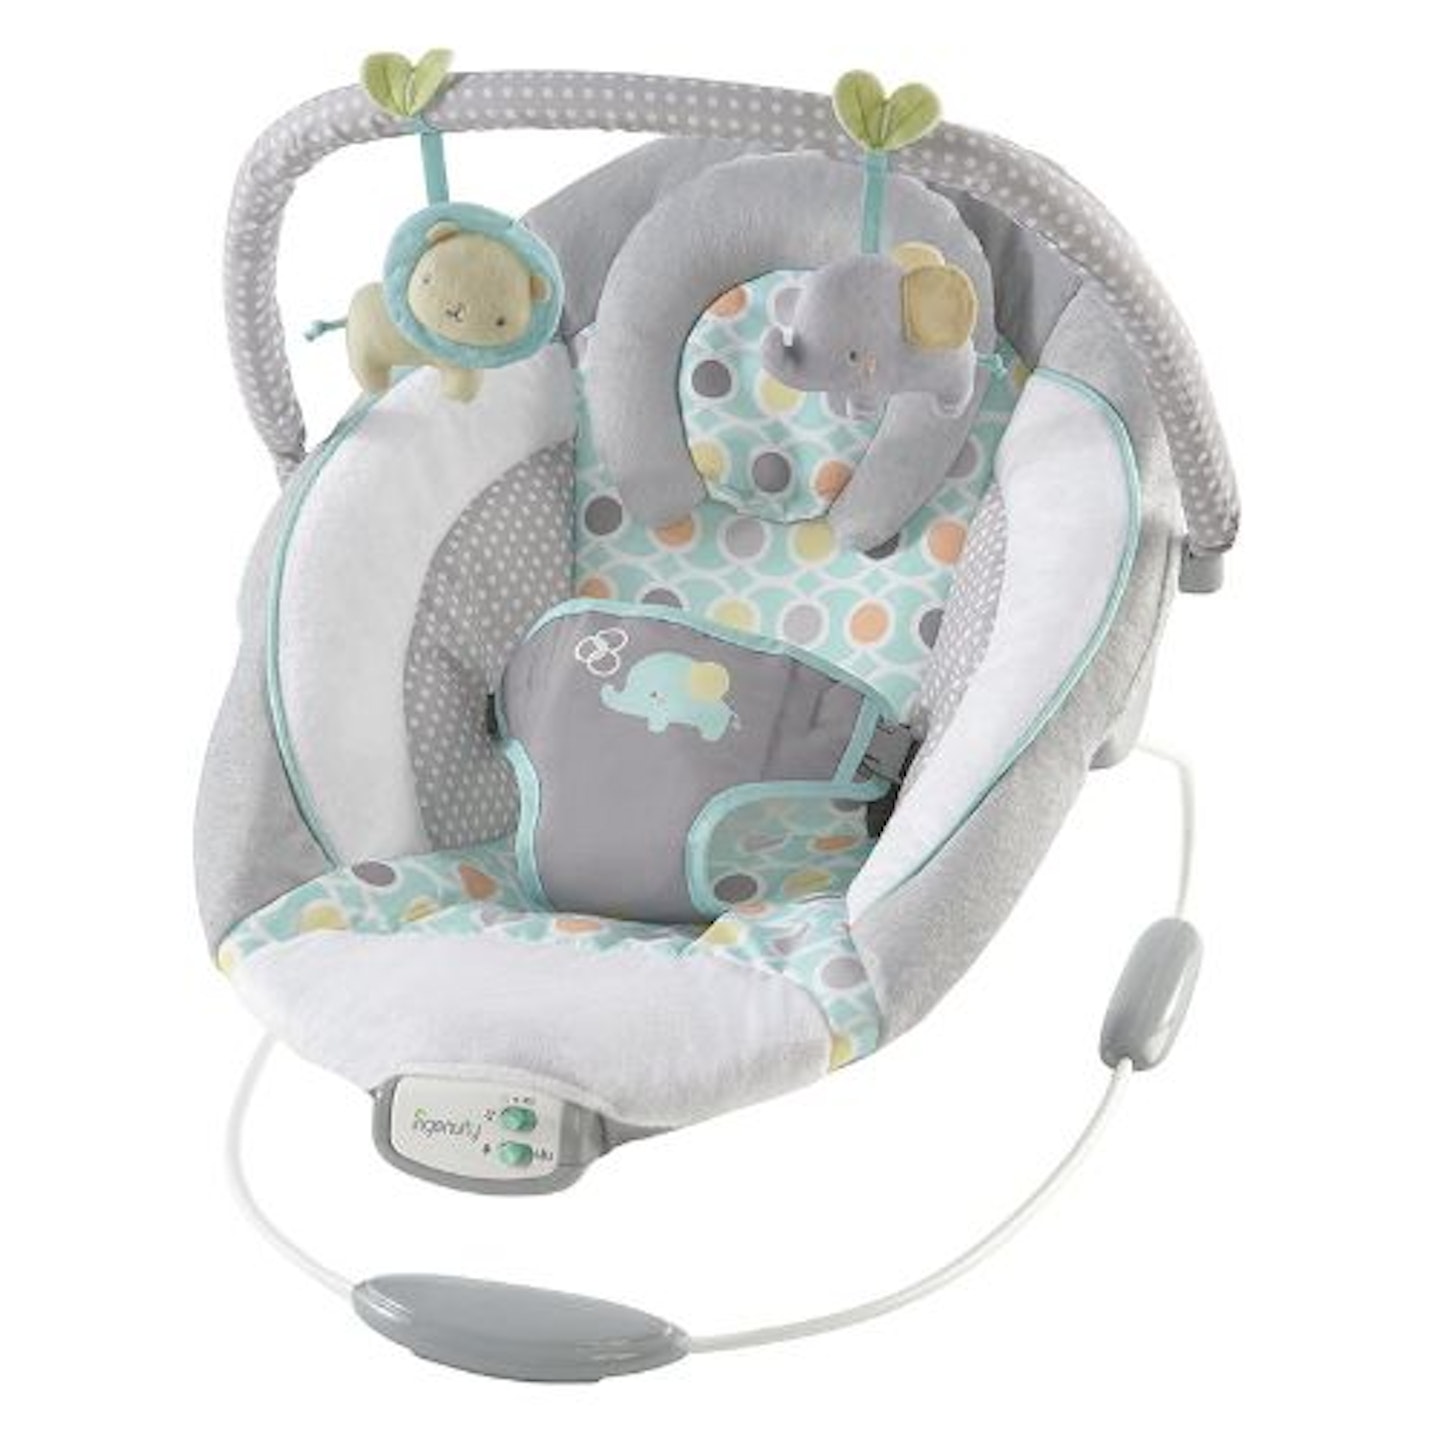 Ingenuity Soothing Baby Bouncer Chair